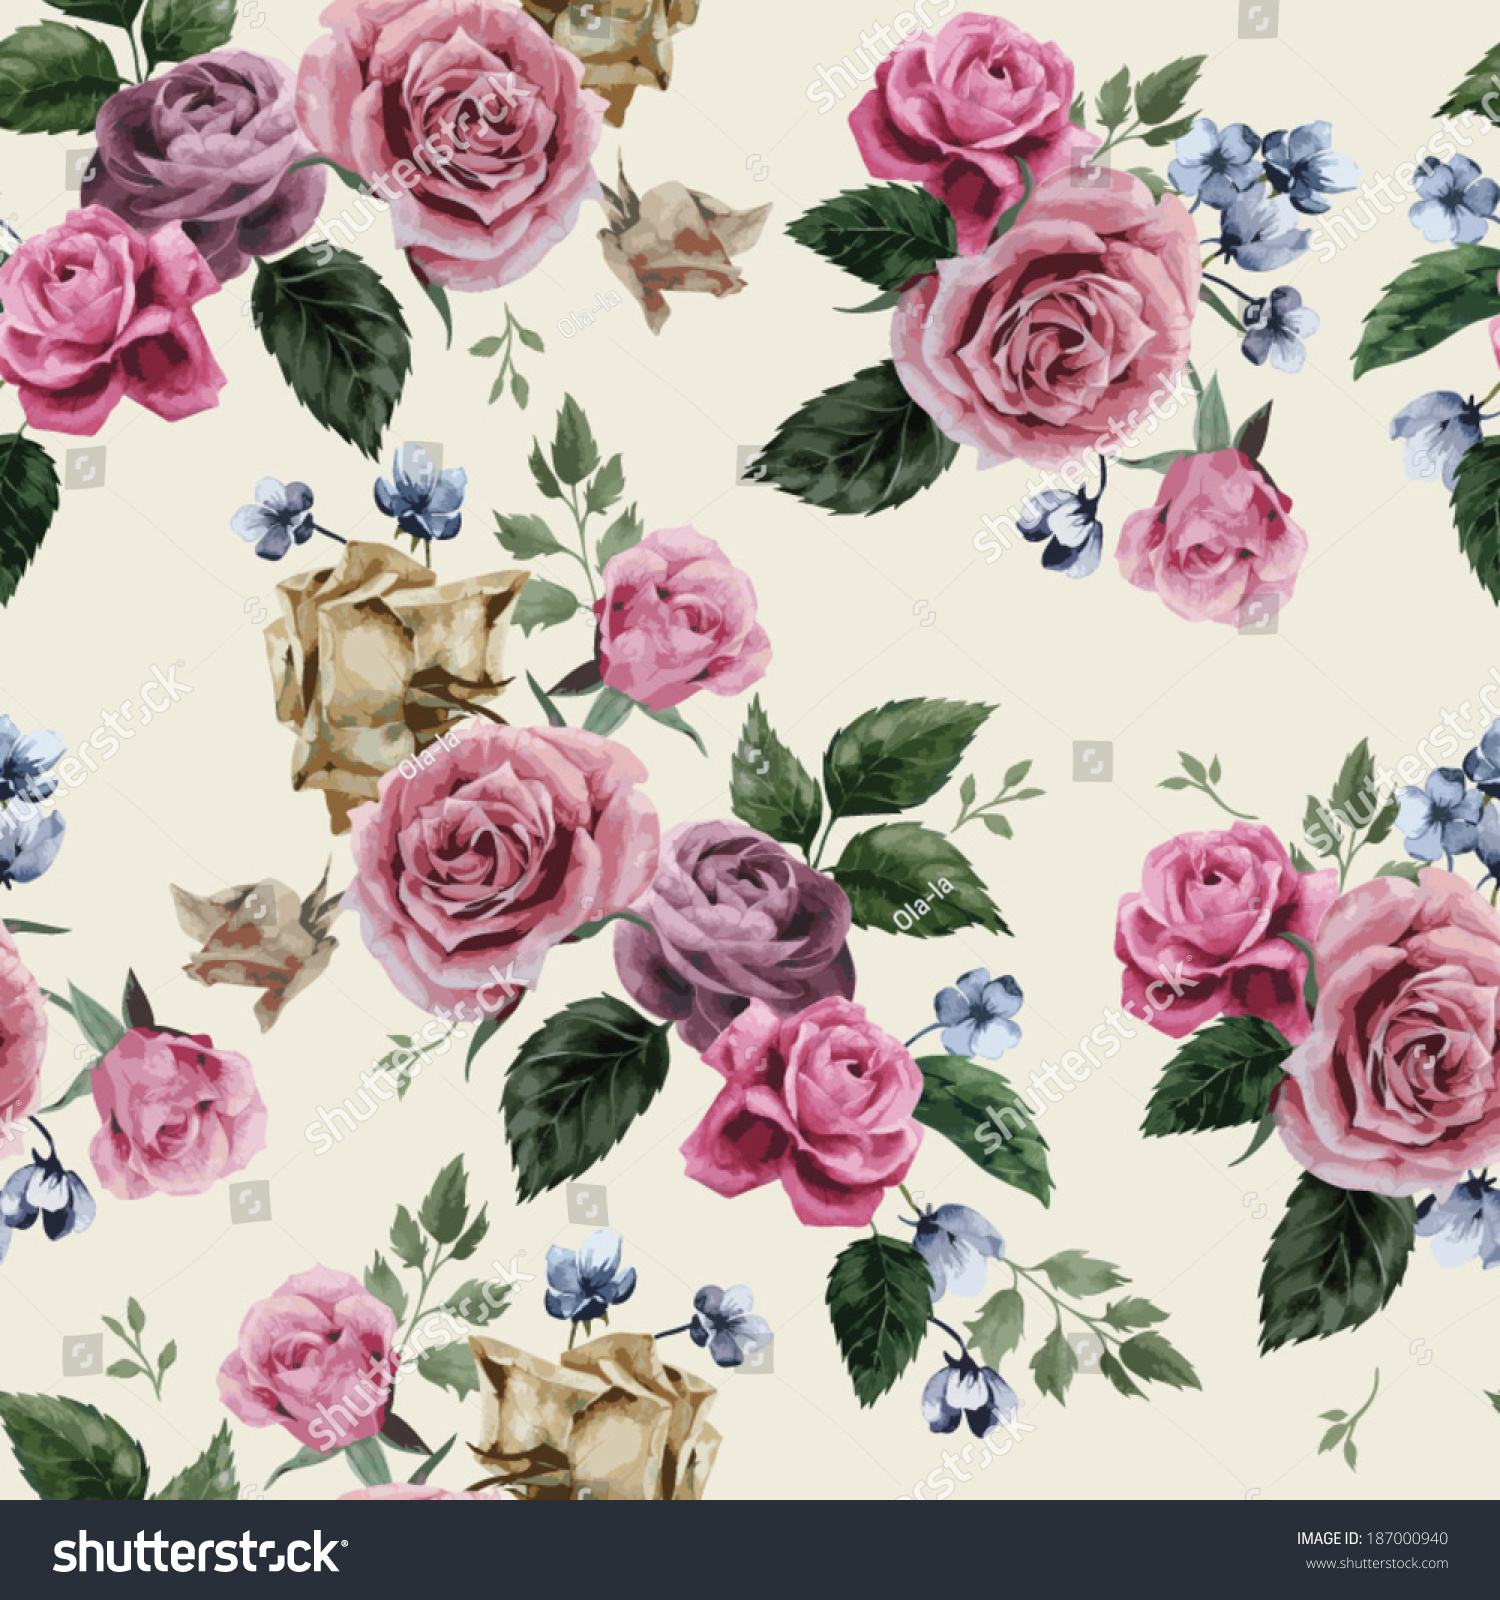 Seamless Floral Pattern With Of Pink Roses On Light Background ...